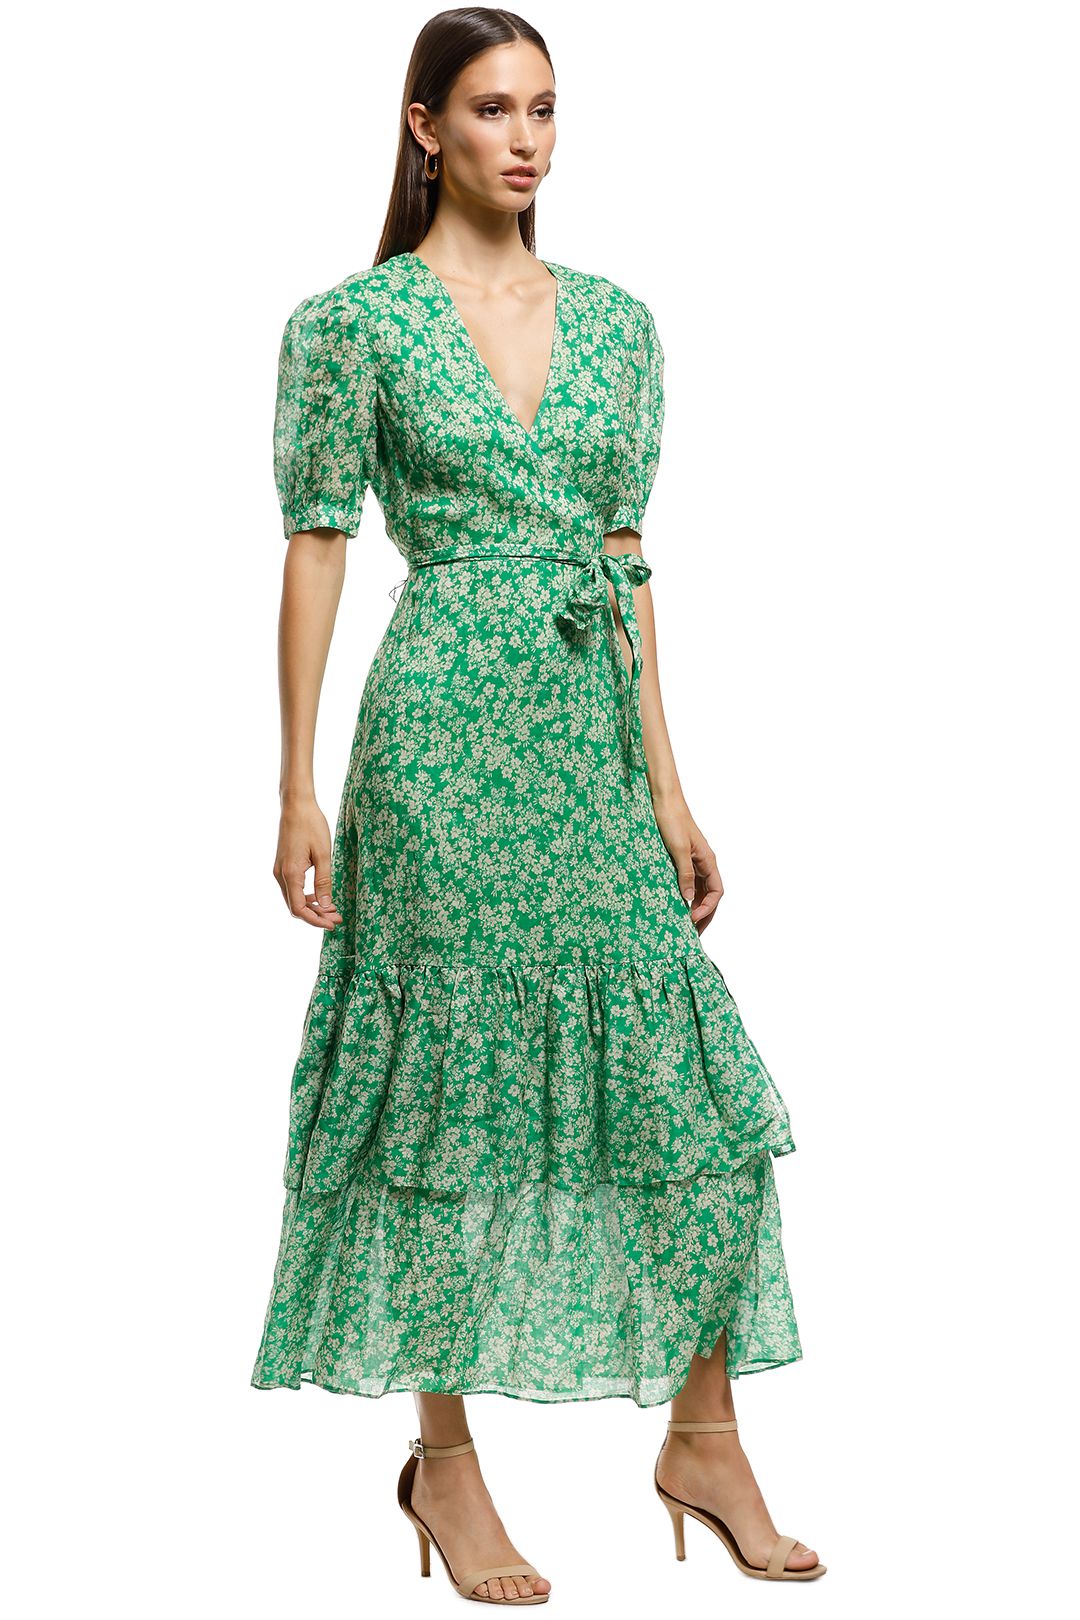 Talulah - Green With Envy Midi Dress - Green - Side